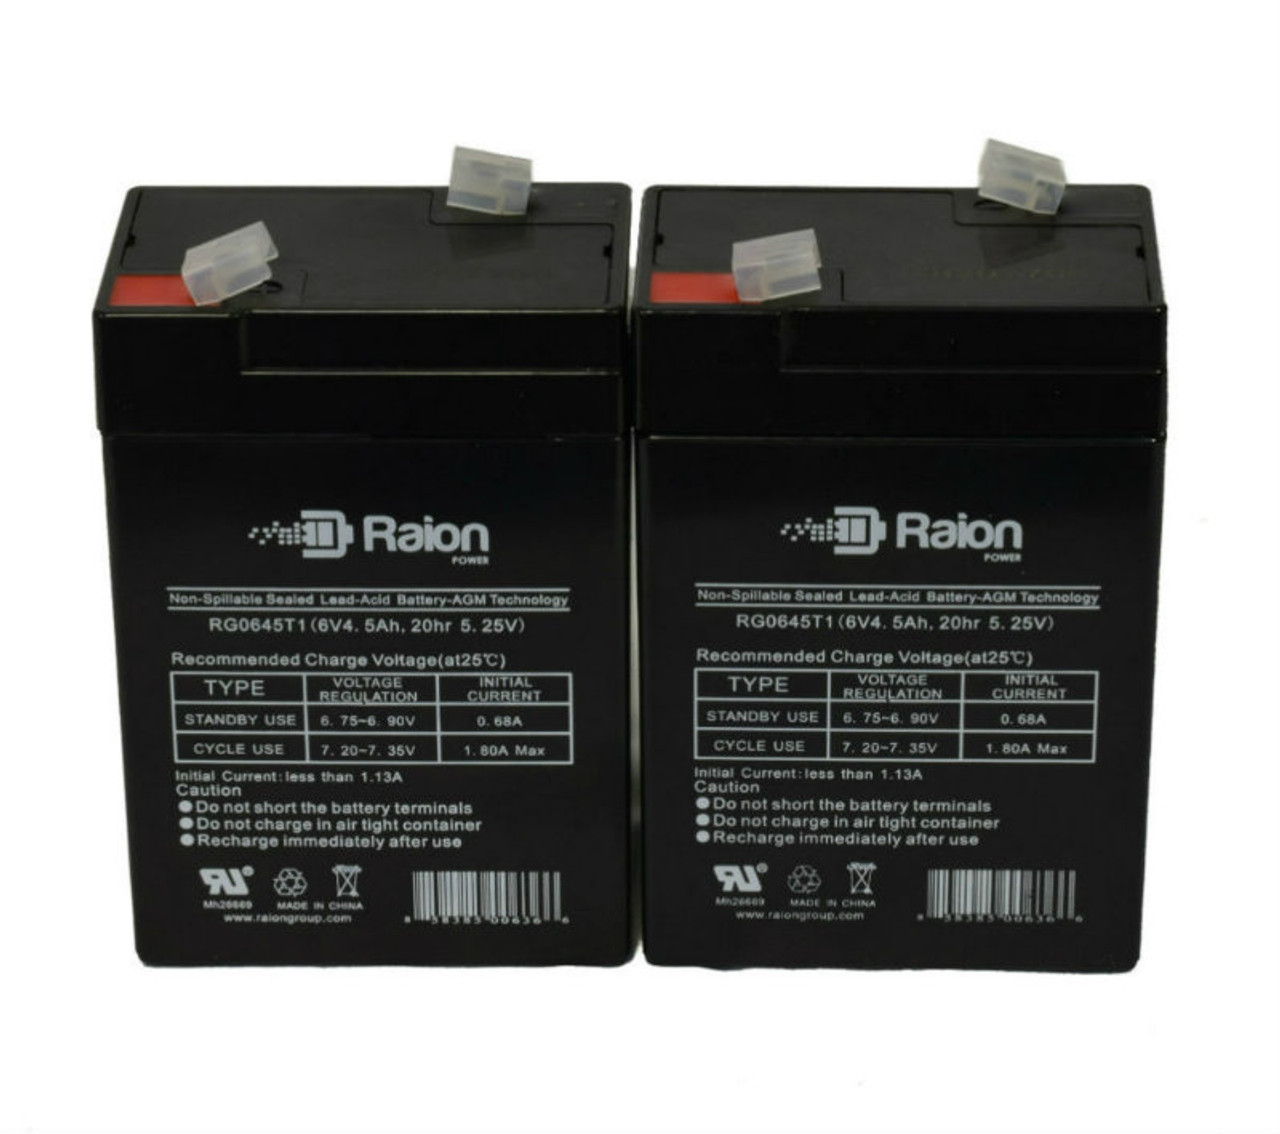 Raion Power 6 Volt 4.5Ah RG0645T1 Replacement Battery for Starlight 6FM4.5 - 2 Pack